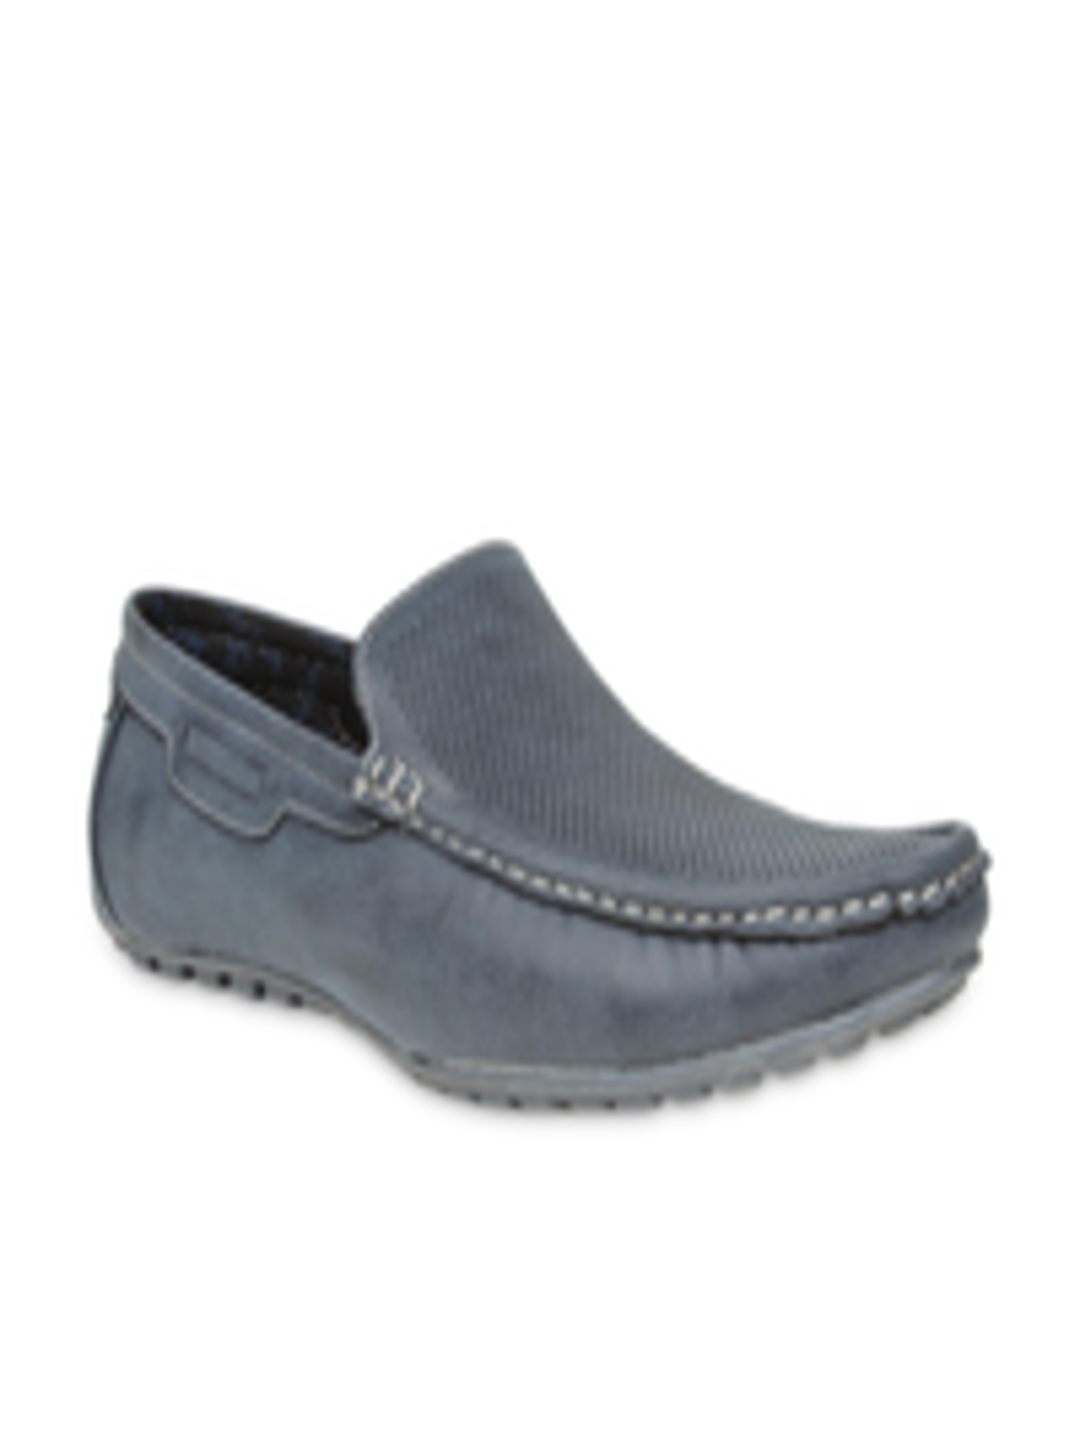 Buy Bruno Manetti Men Blue Loafers - Casual Shoes for Men 438885 | Myntra